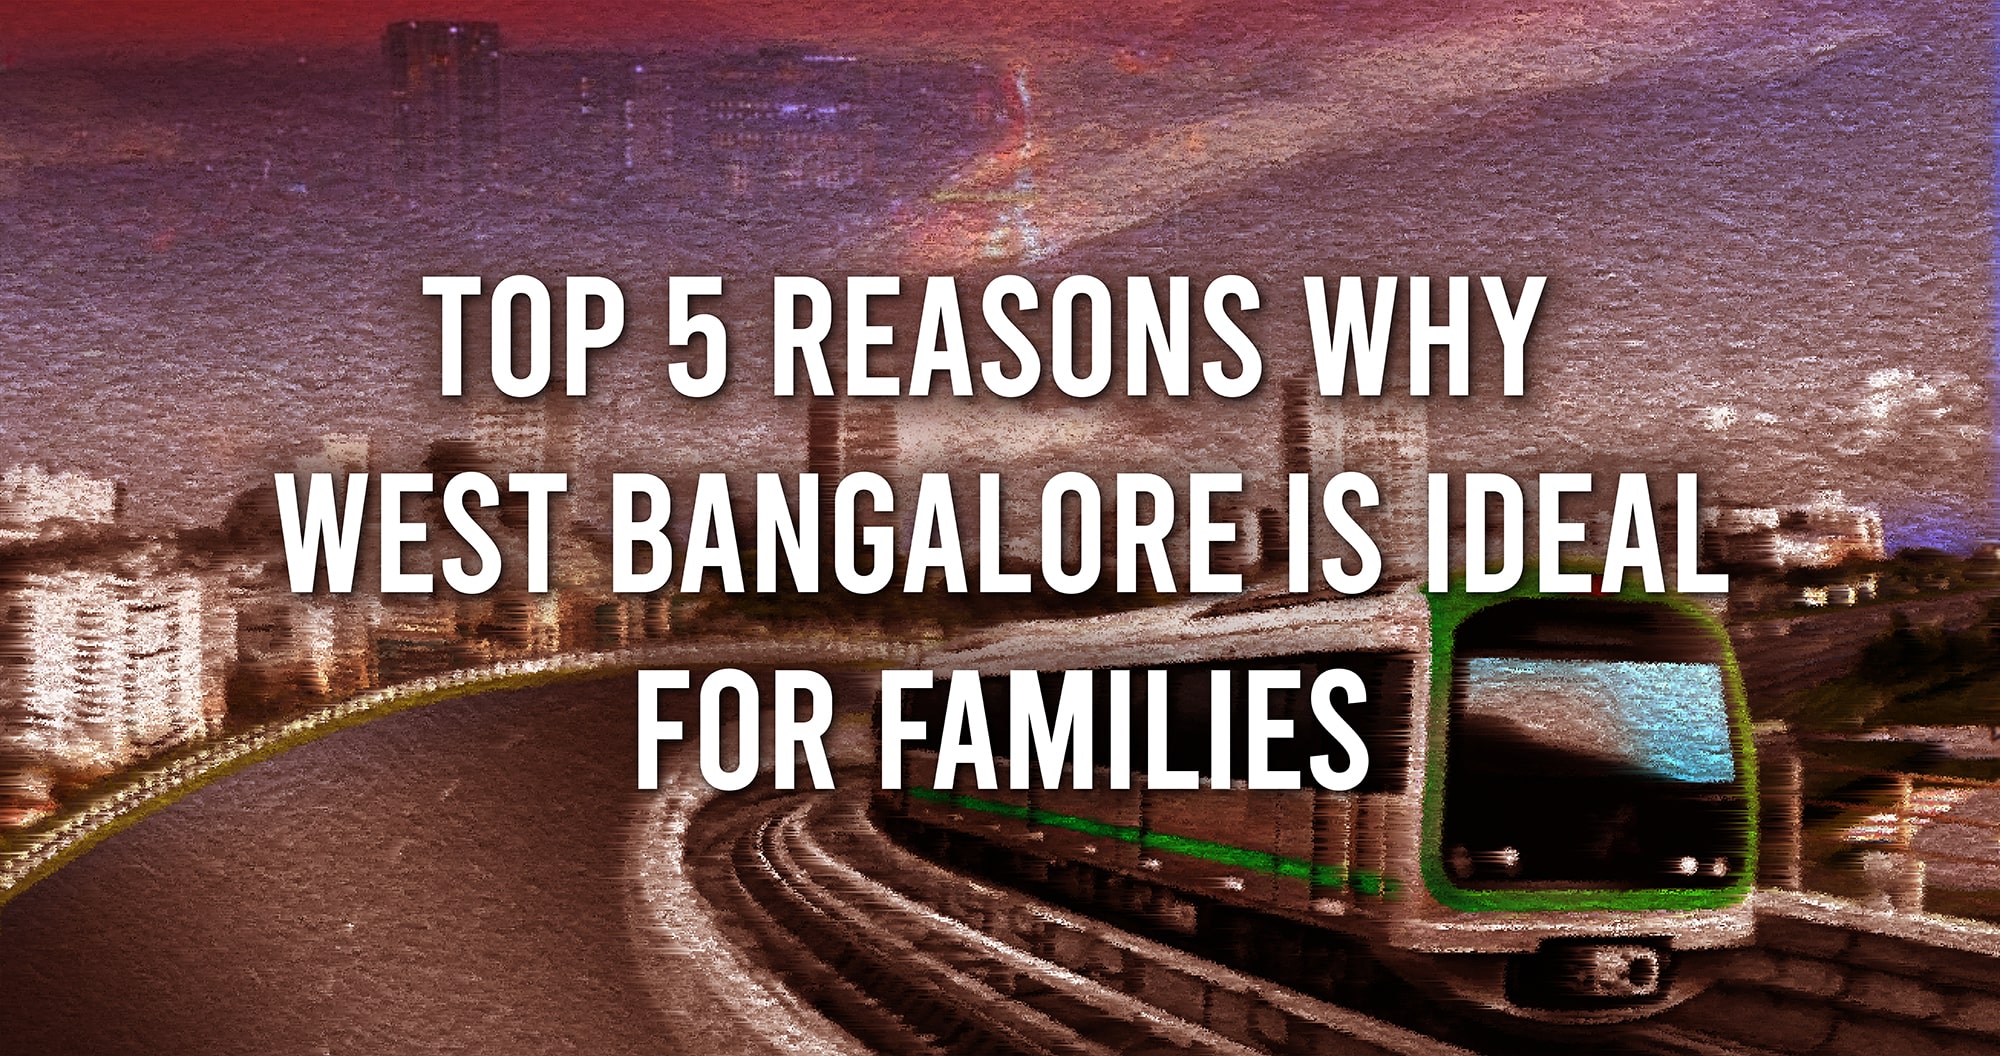 Top 5 Reasons Why West Bangalore is Ideal for Families